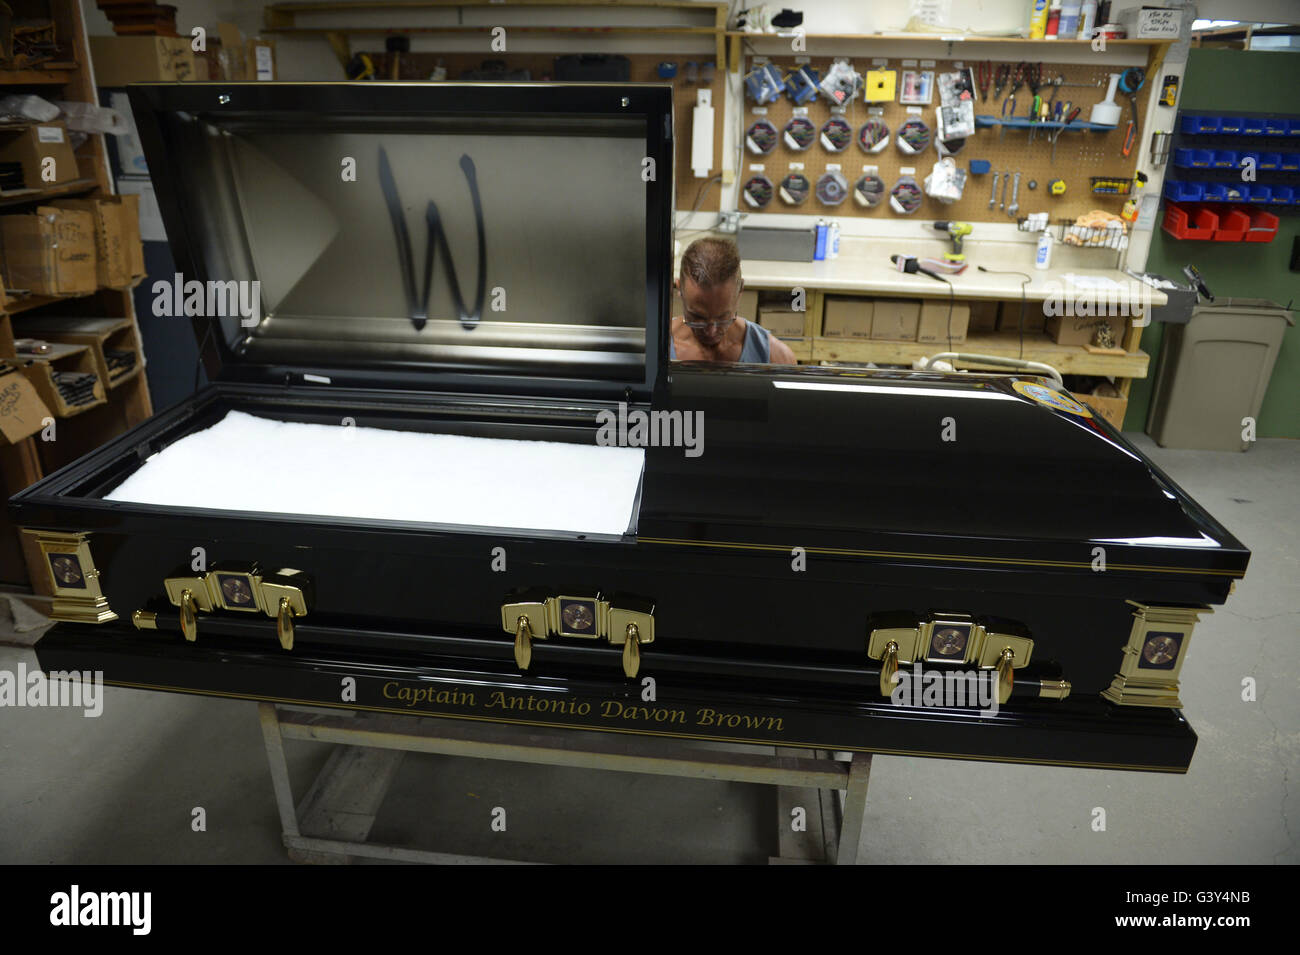 Orlando, USA. 16th June, 2016. A worker prints the name of a victim of shooting spree at Pulse nightclub to his coffin in Cardinal Casket Company in Orlando, the United States, June 16, 2016. Funeral preparations for victims were underway as the city-owned Greenwood Cemetery would donate plots of land and the casket company had finished 24 coffins for victims. Credit:  Yin Bogu/Xinhua/Alamy Live News Stock Photo